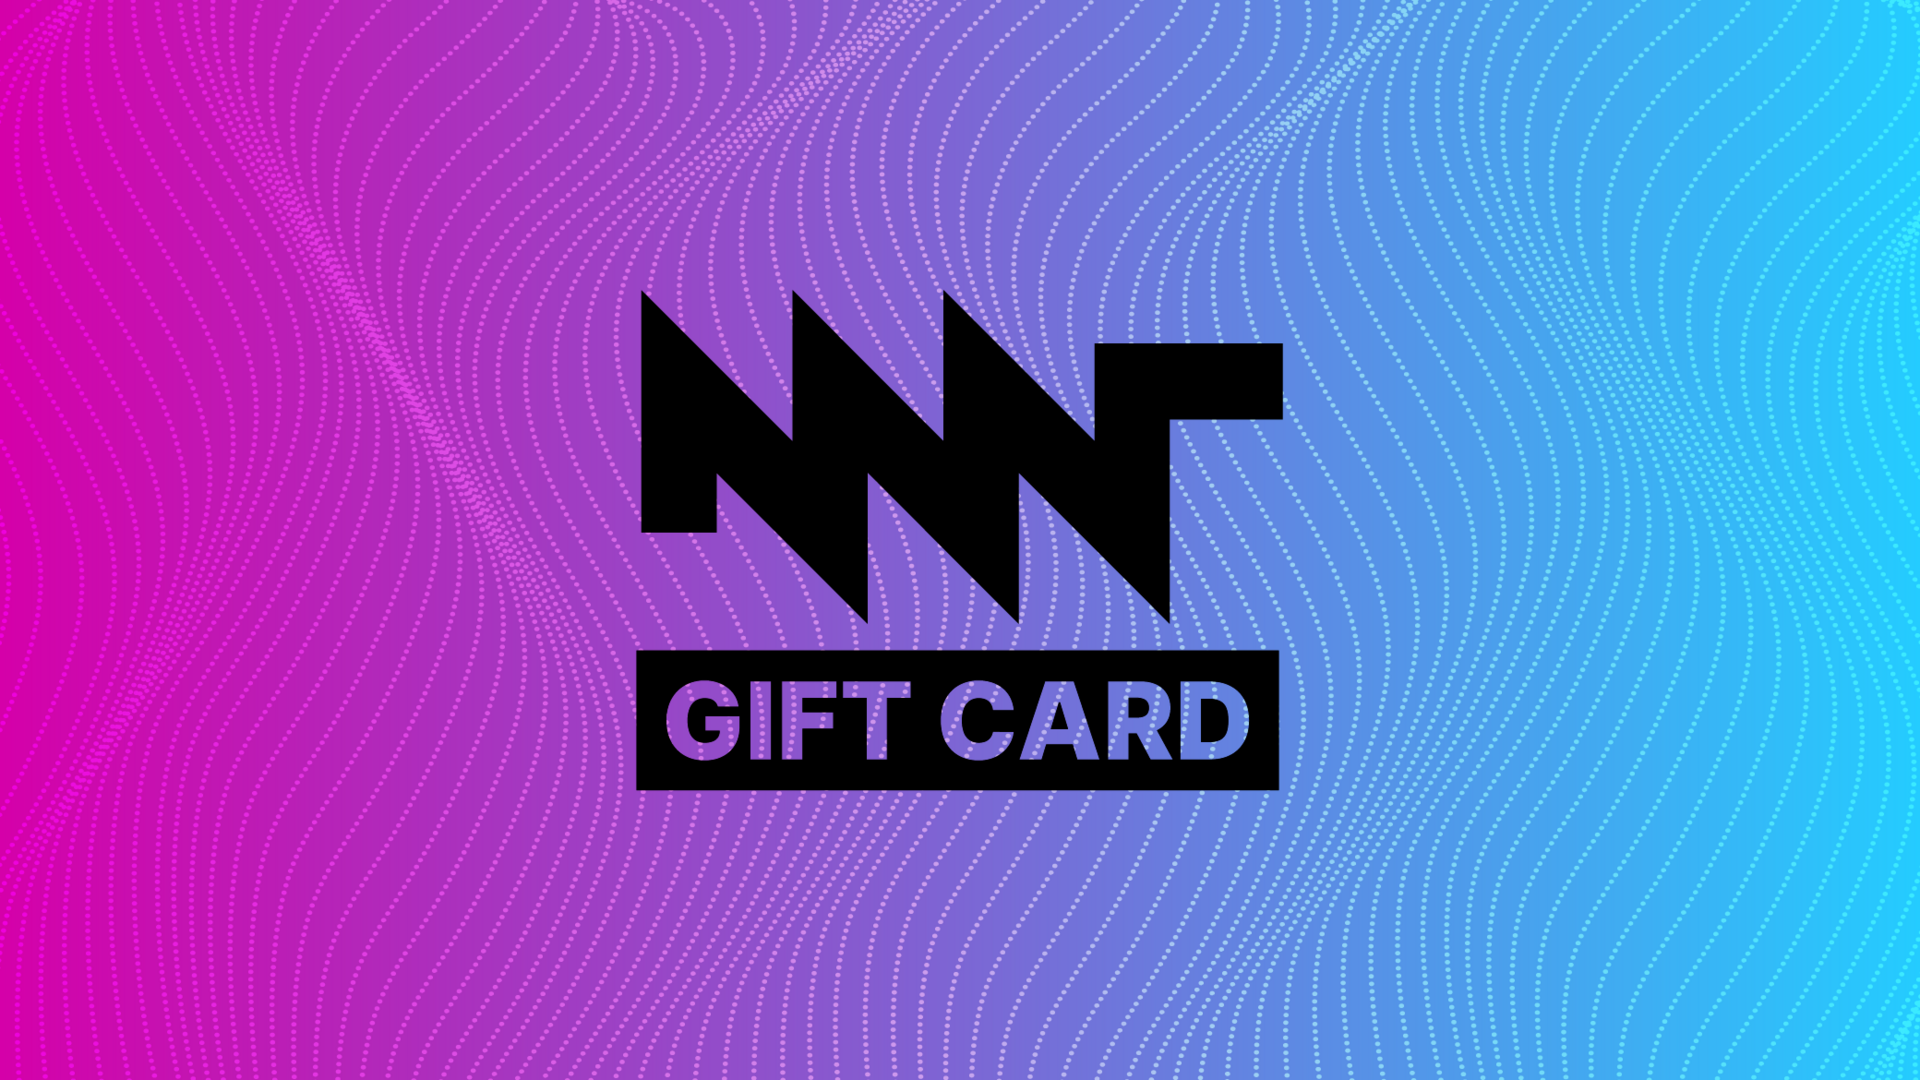 MNT Gift Card - gradient background with waves, MNT logo and voucher